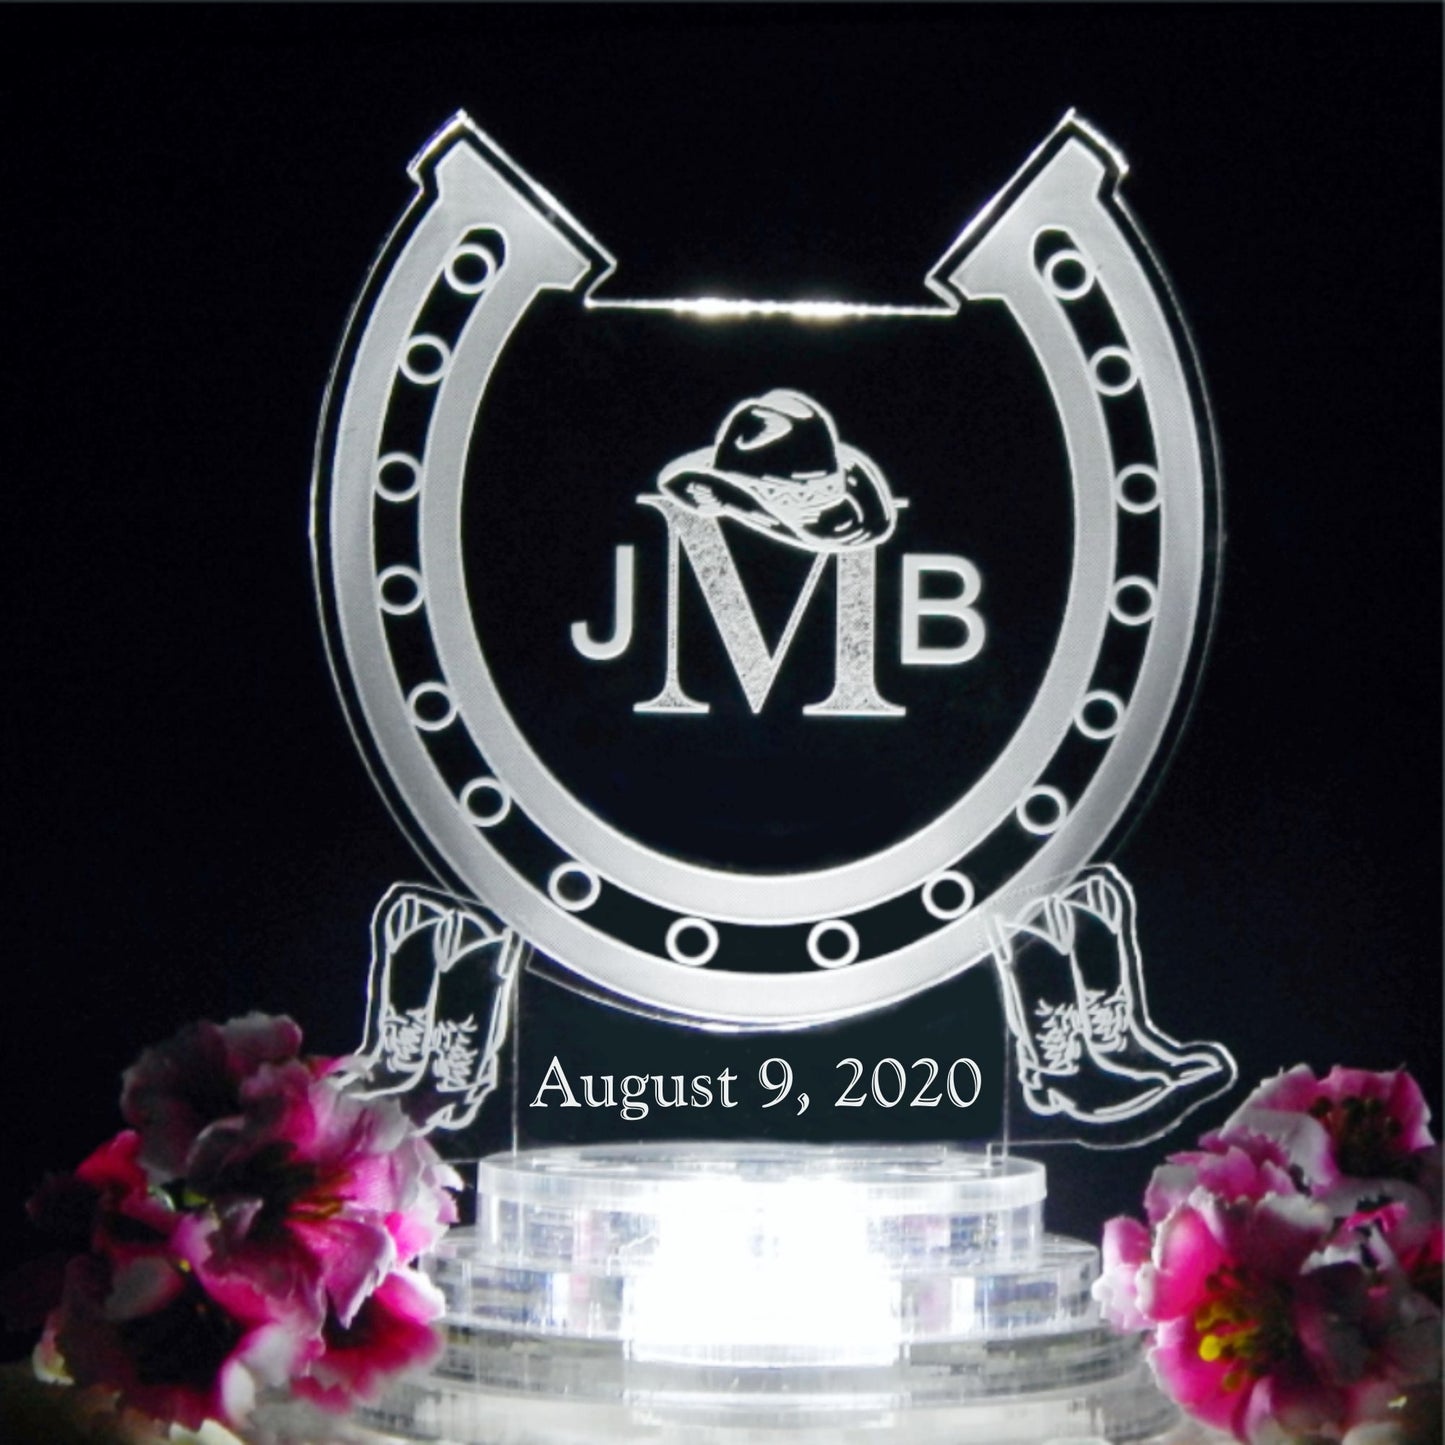 horseshoe shaped acrylic cake topper designed with a horseshoe design and engraved with monogram and date 